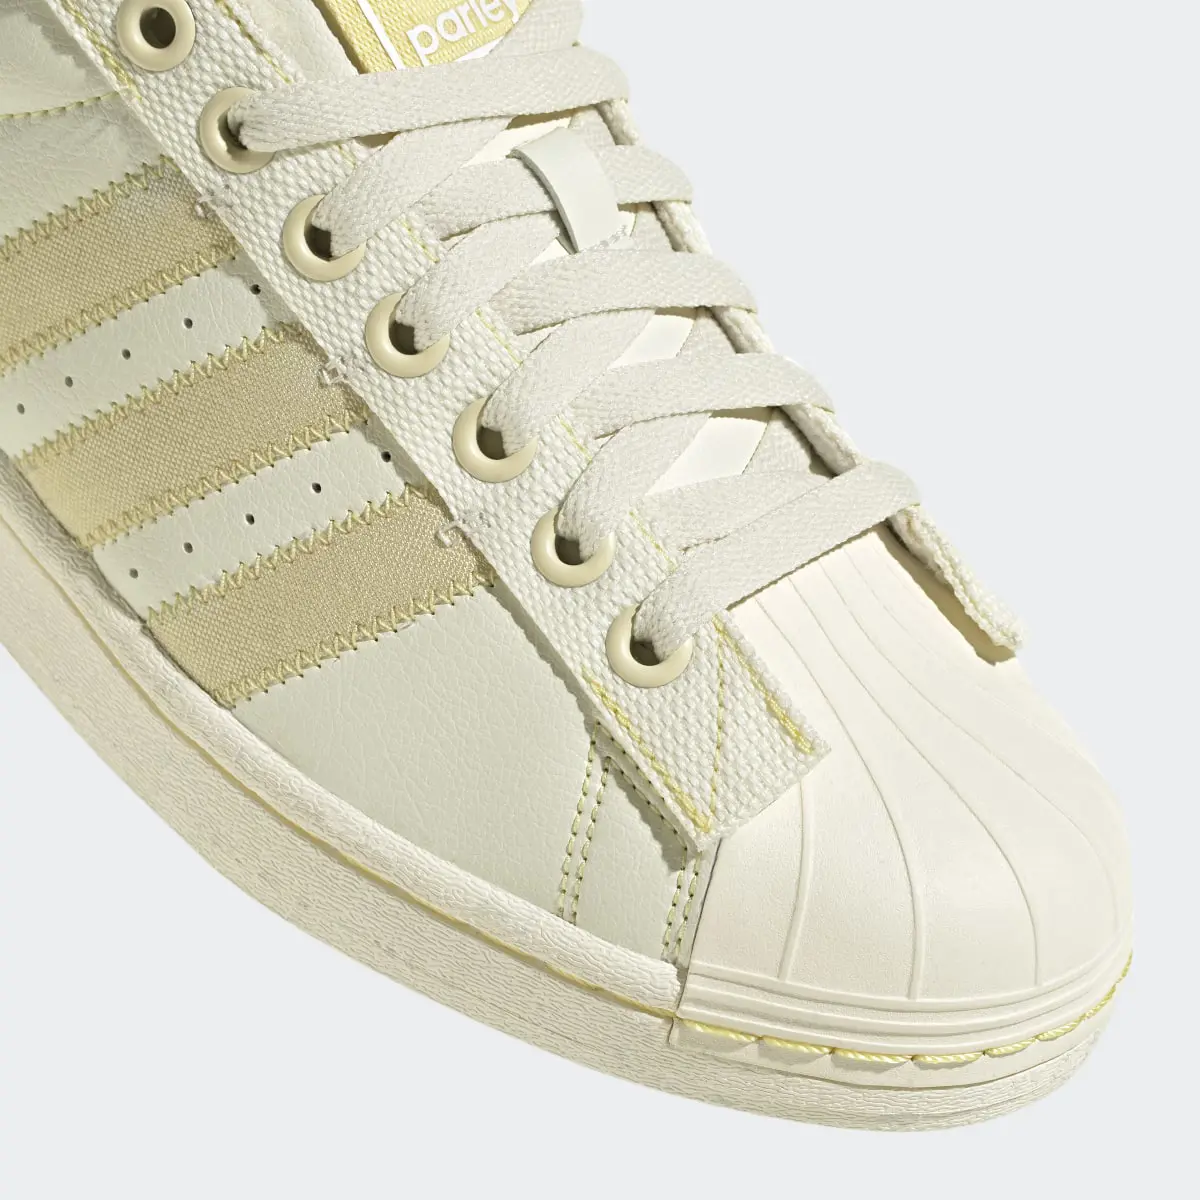 Adidas Superstar Parley Shoes. 3